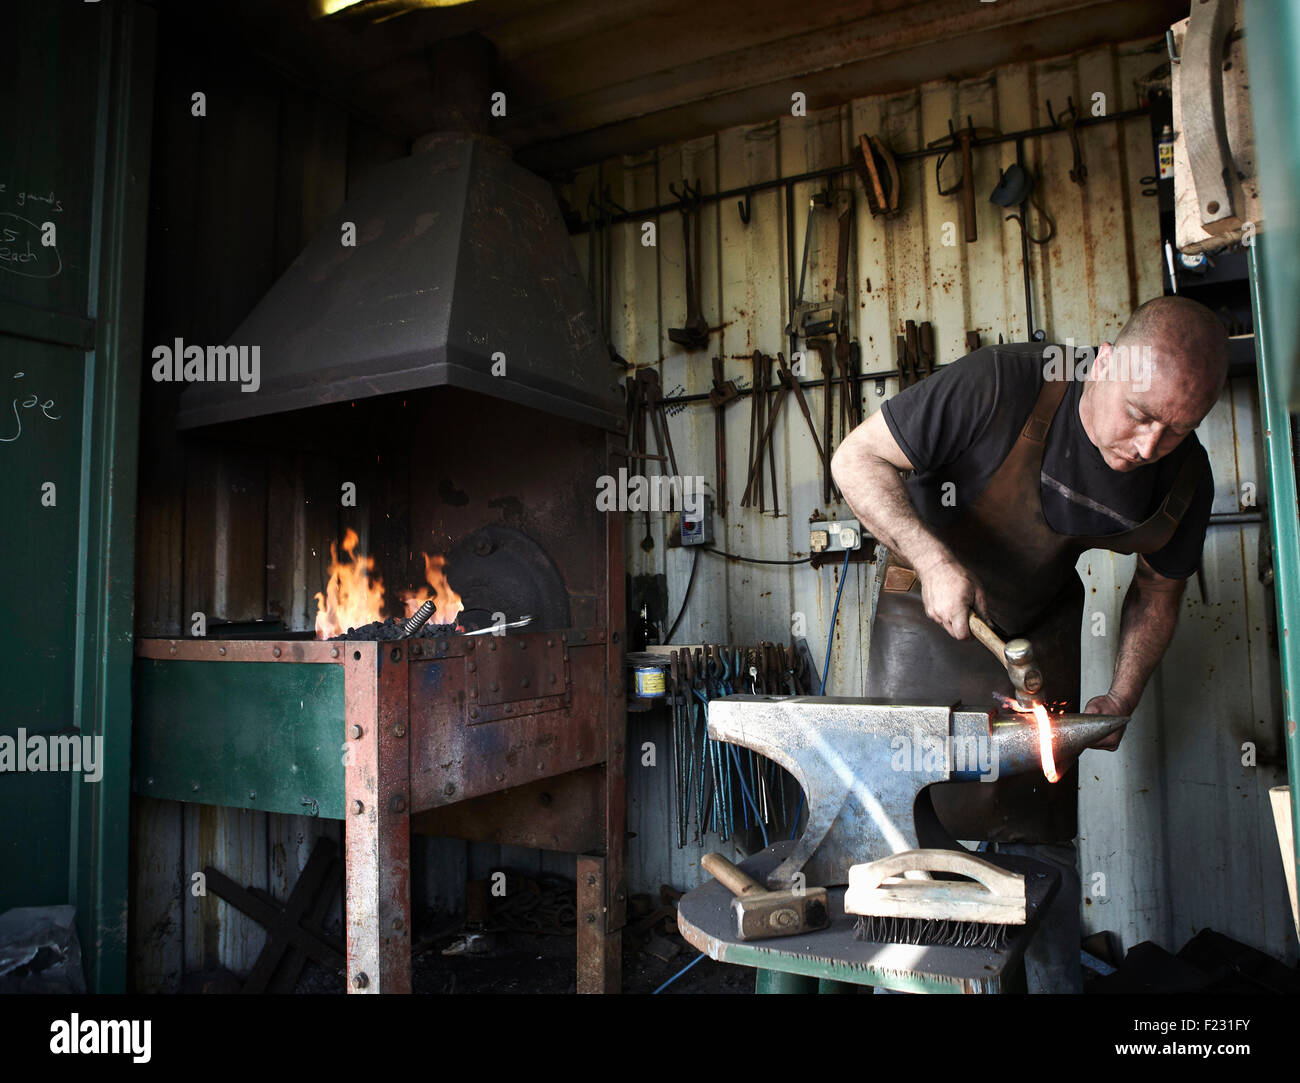 Blacksmith shaping a hot piece of iron on an anvil in a traditional forge with an open fire. Stock Photo